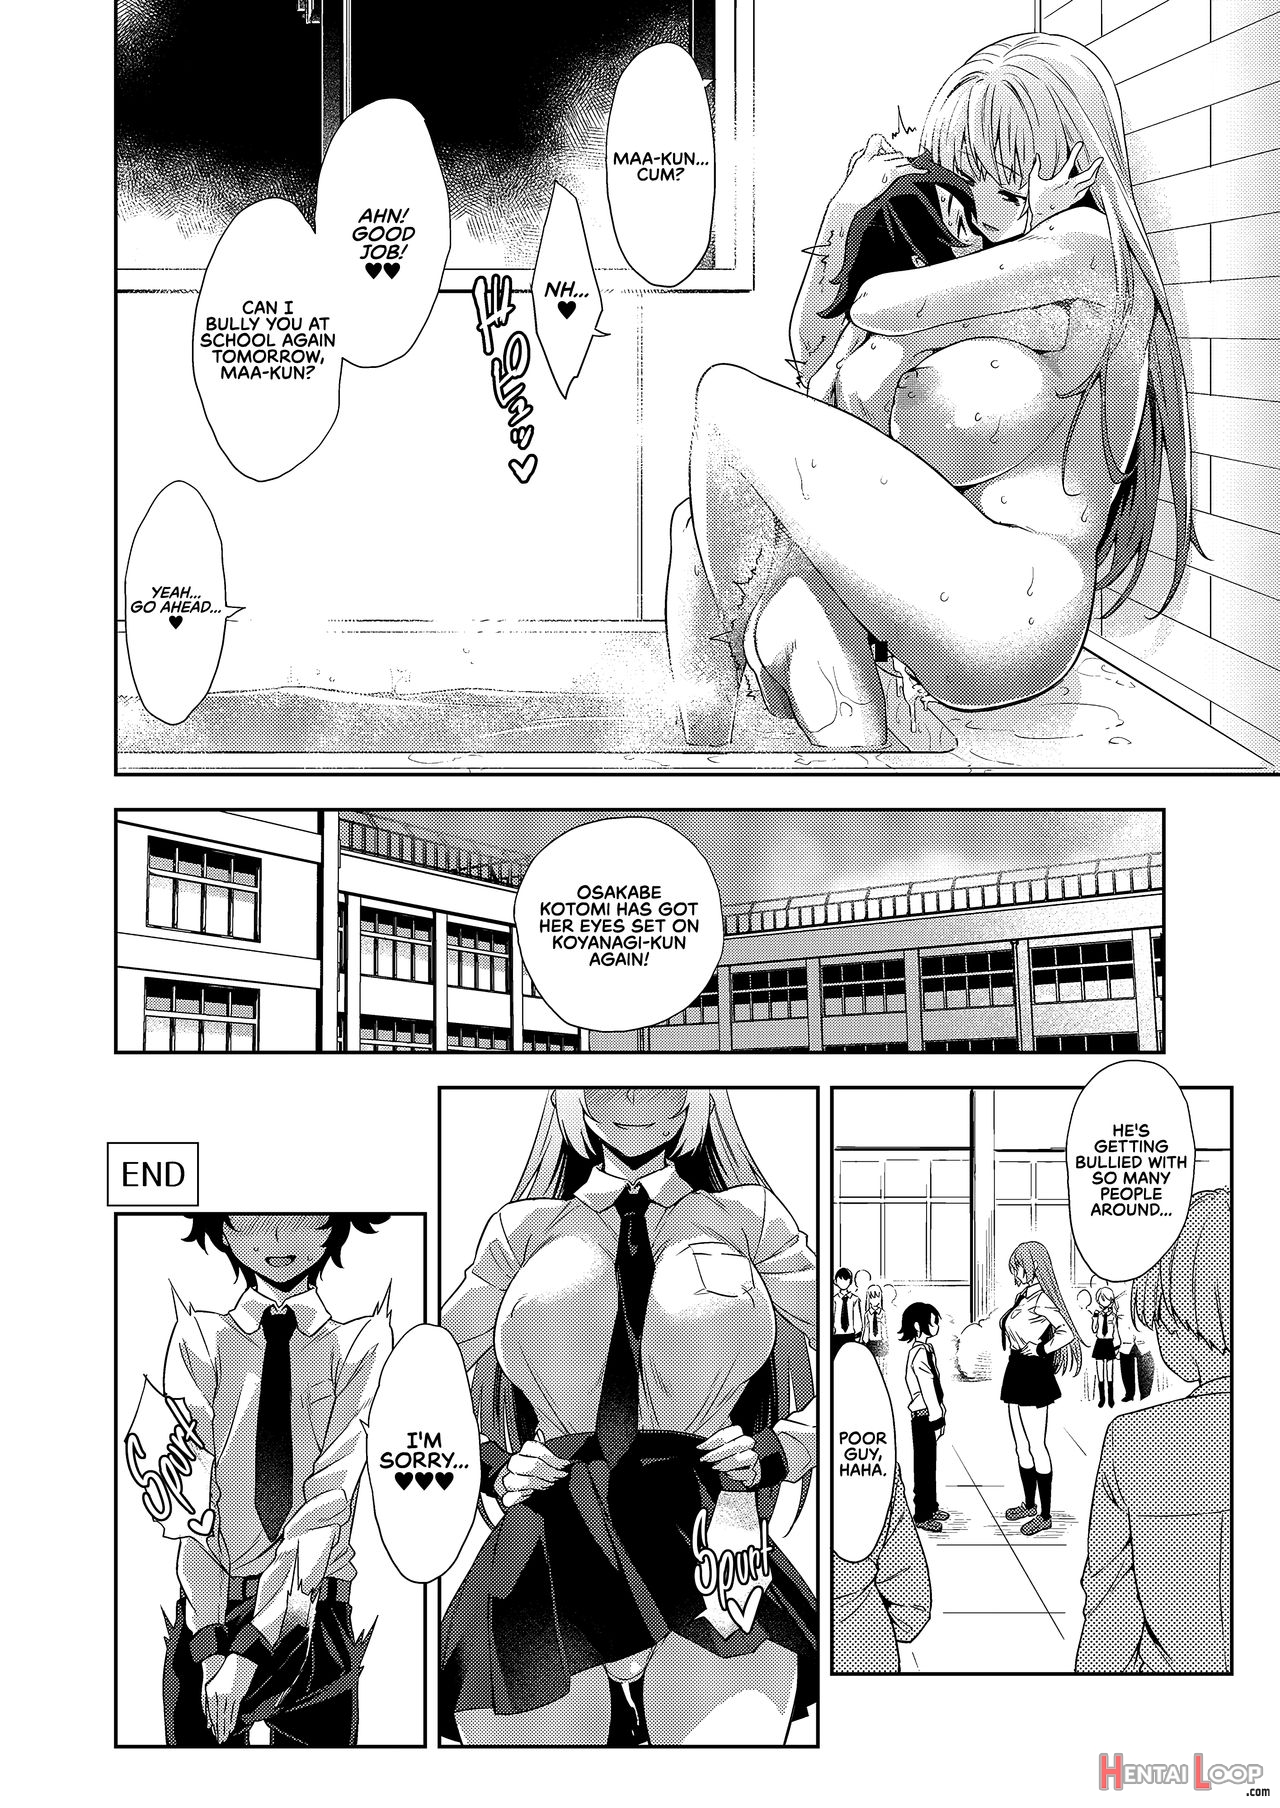 My Big Girlfriend Acts The Polar Opposite In Bed And At School. page 25